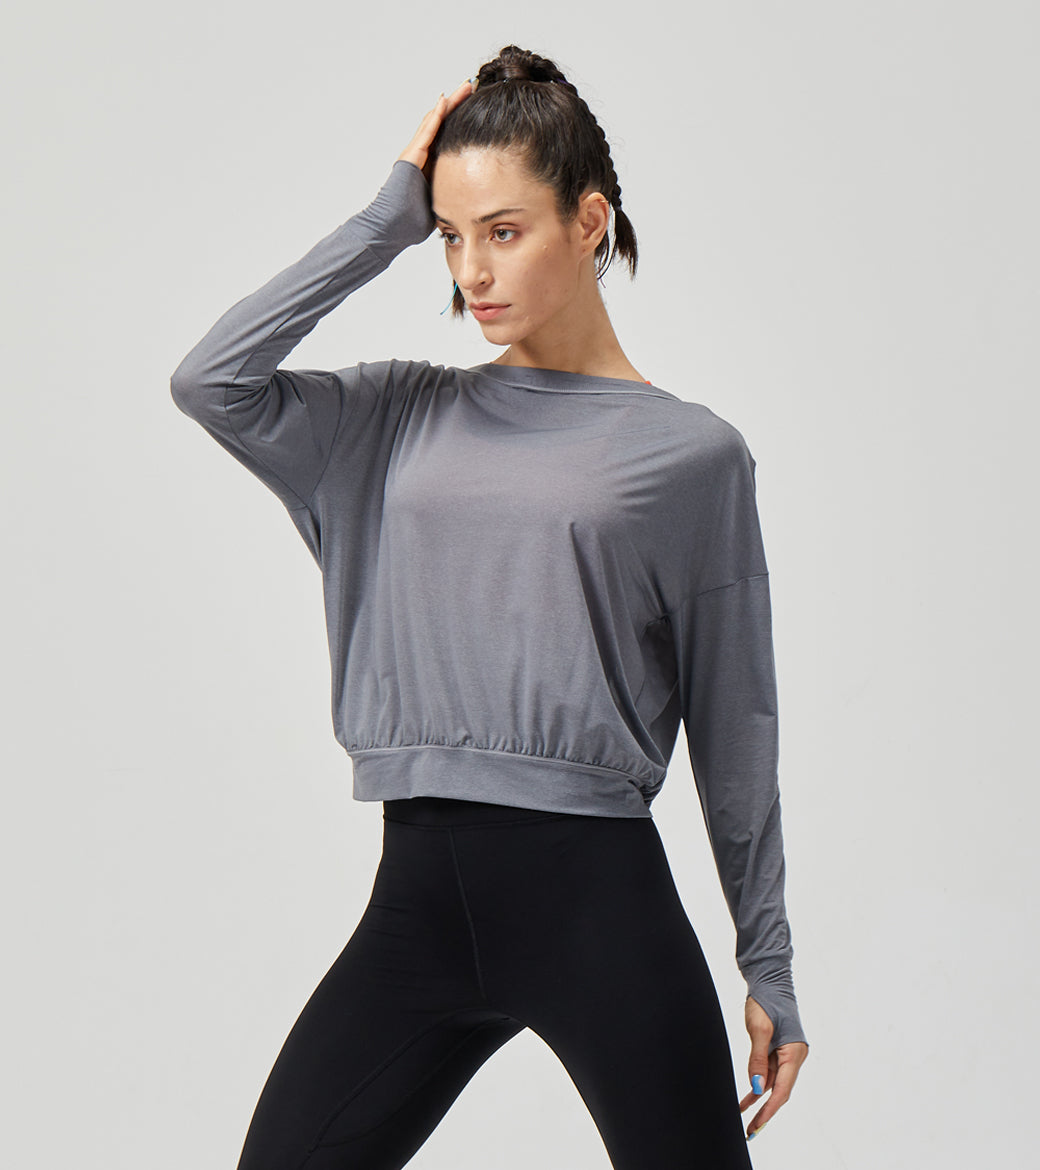 LOVESOFT Womens Grey Hollow Out Casual Long Sleeves